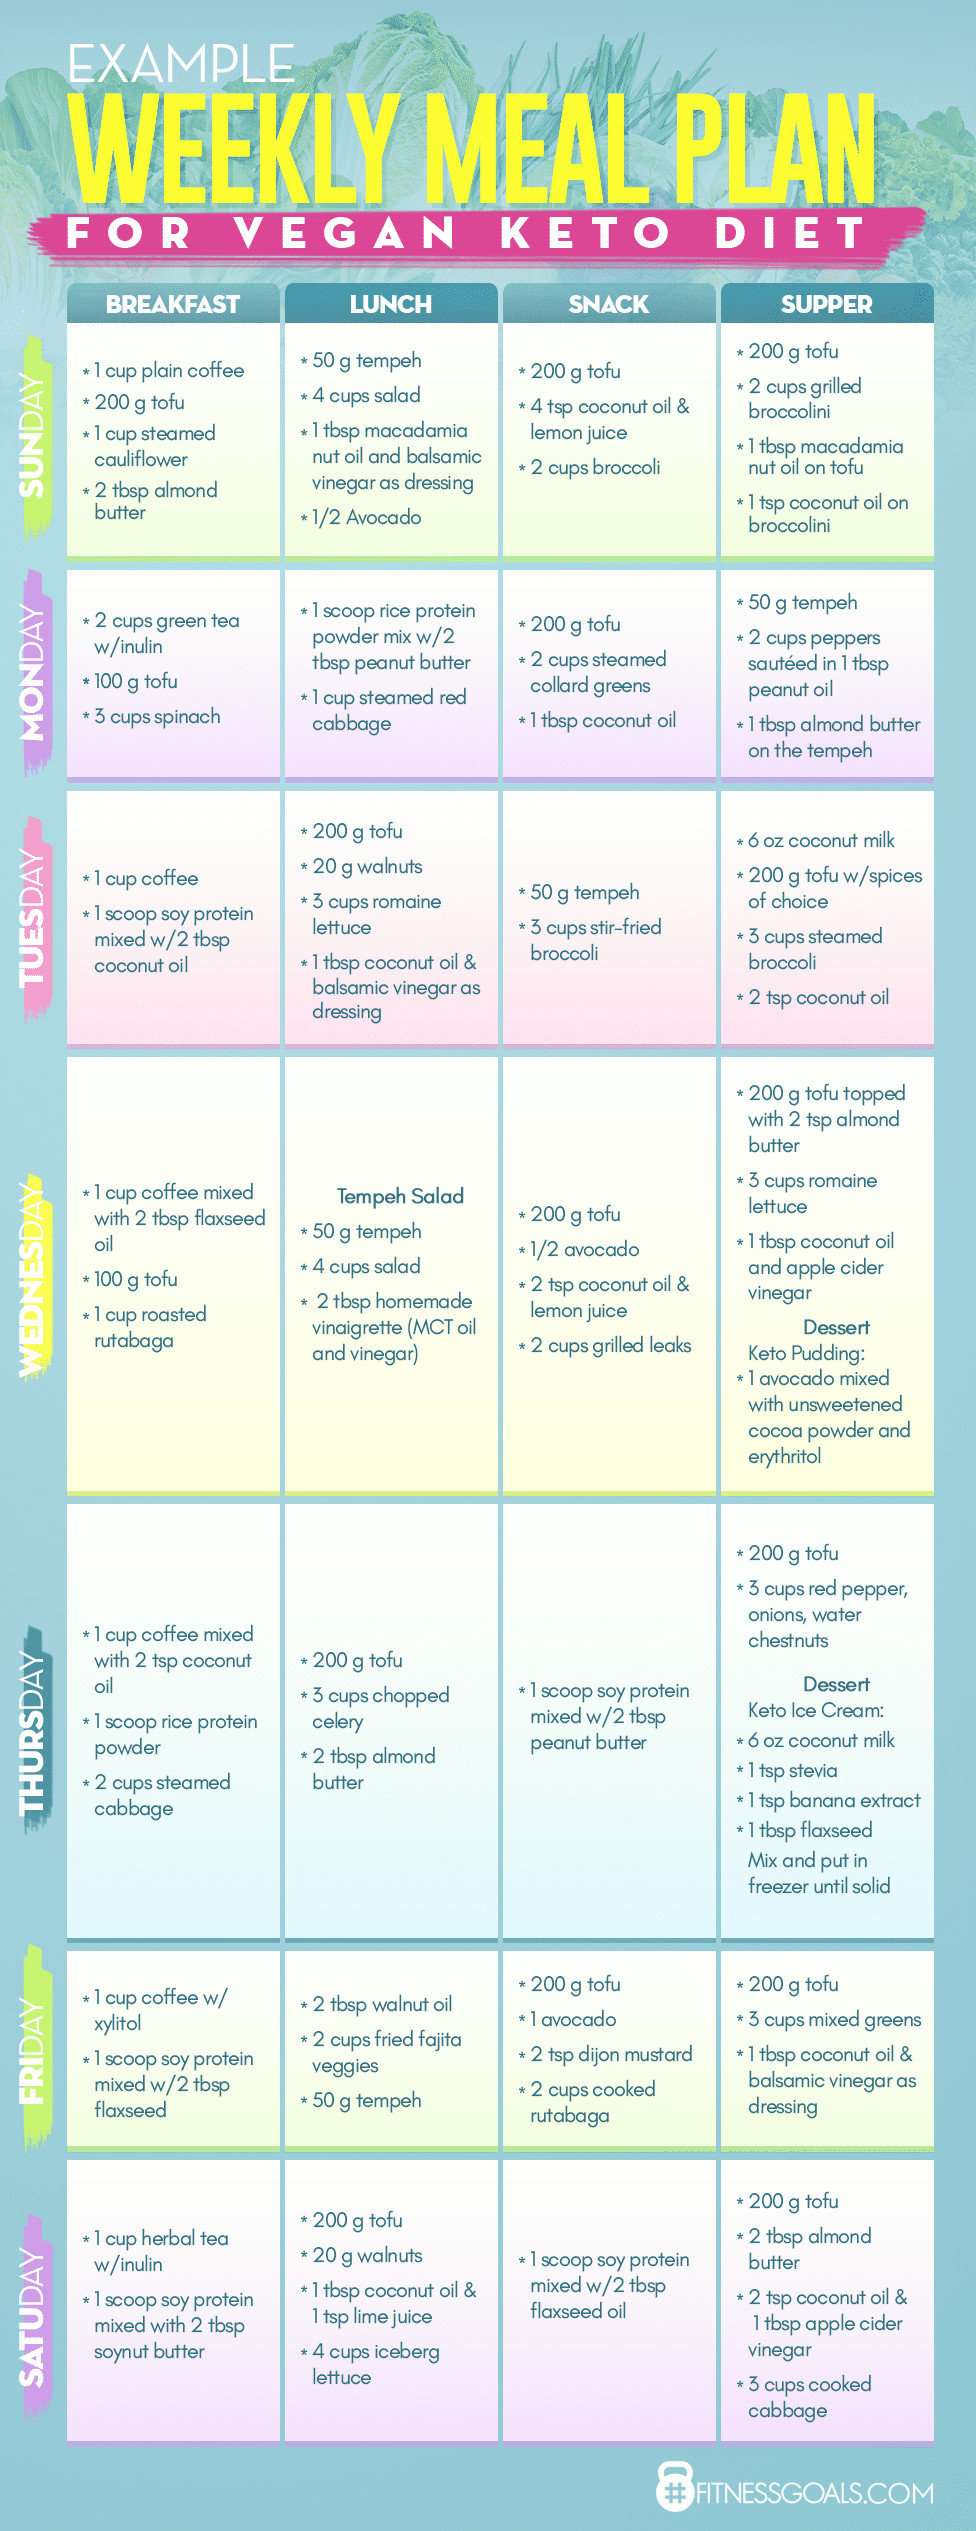 Keto Diet Plan Chart
 Vegan Ketogenic Diet Guide on How to Make it Work without